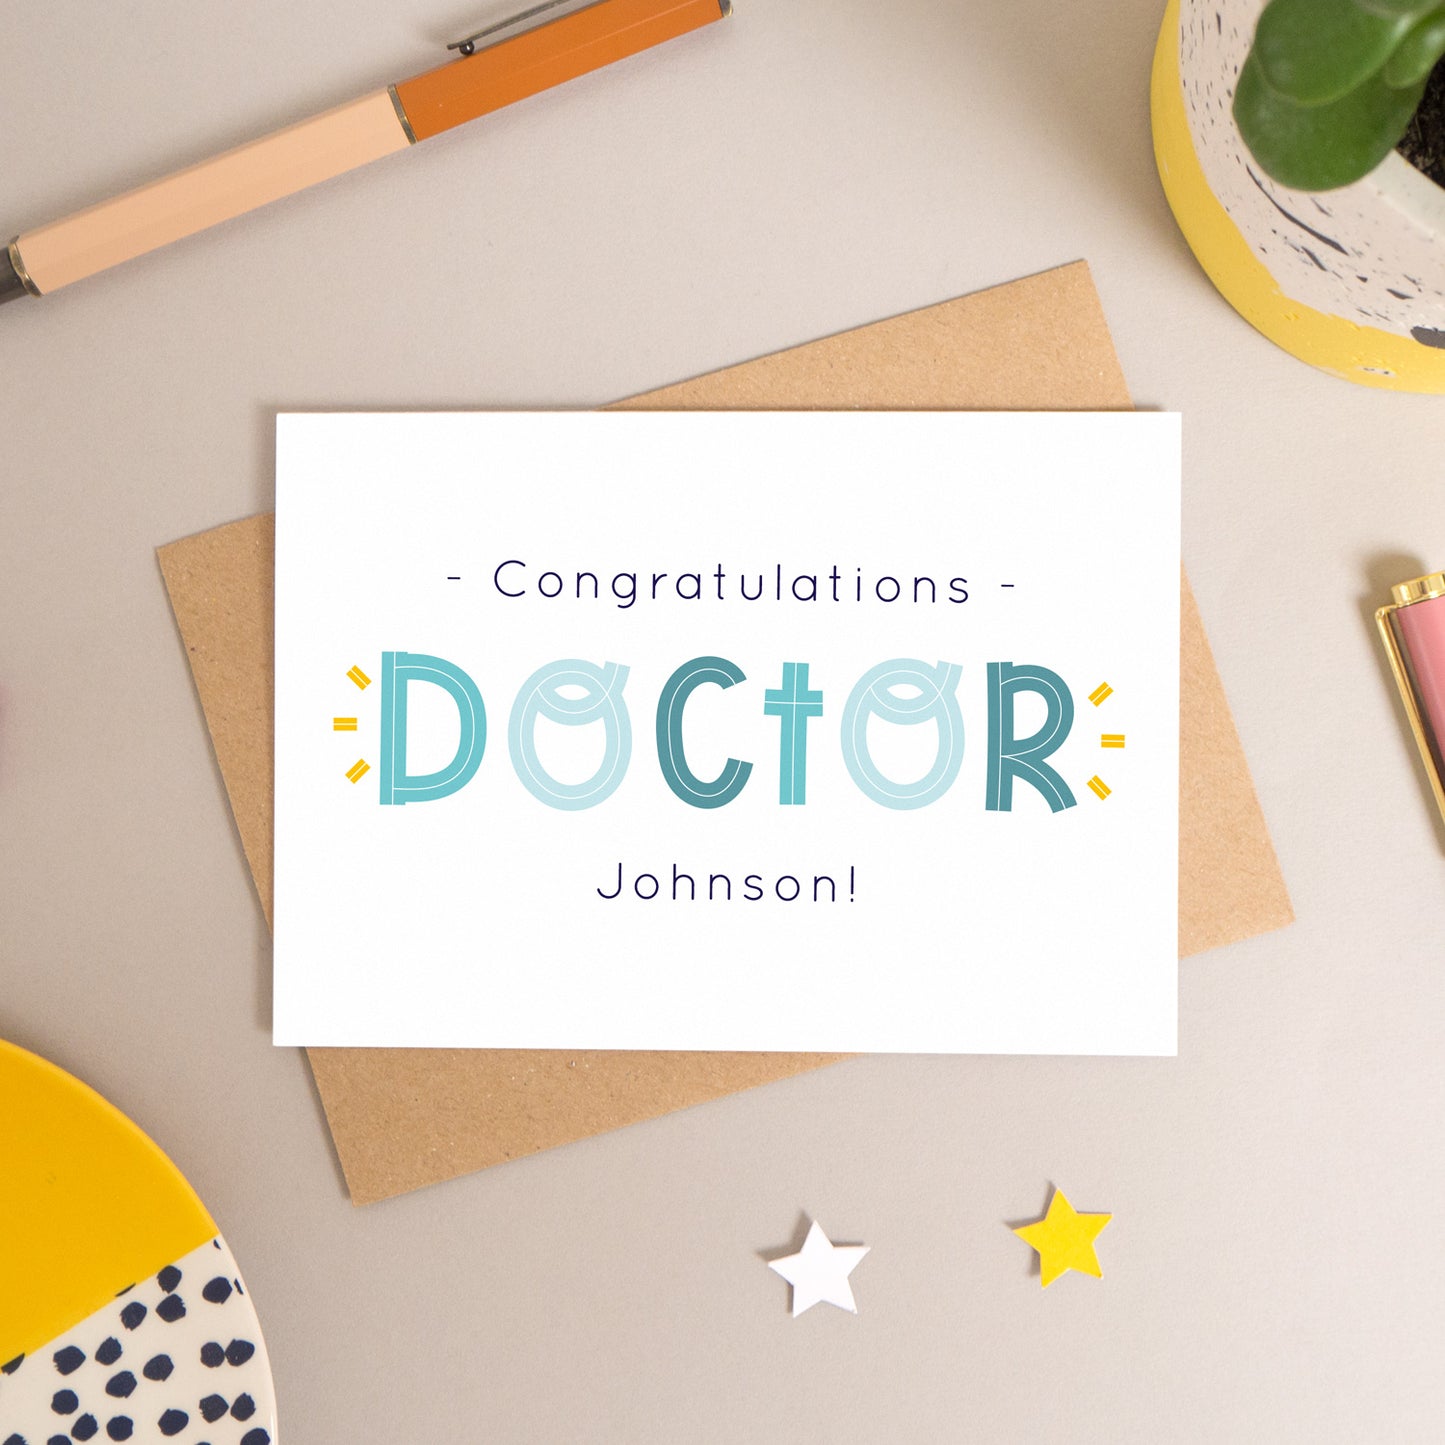 This personalised doctor card has been shot flatlay style looking directly over the top of the card. It is lying flat on it’s kraft brown envelope, on a warm grey background. Surrounding the card are pens, a clip, a plant and a trinket dish. This version of the card is in varying tones of navy and blue.